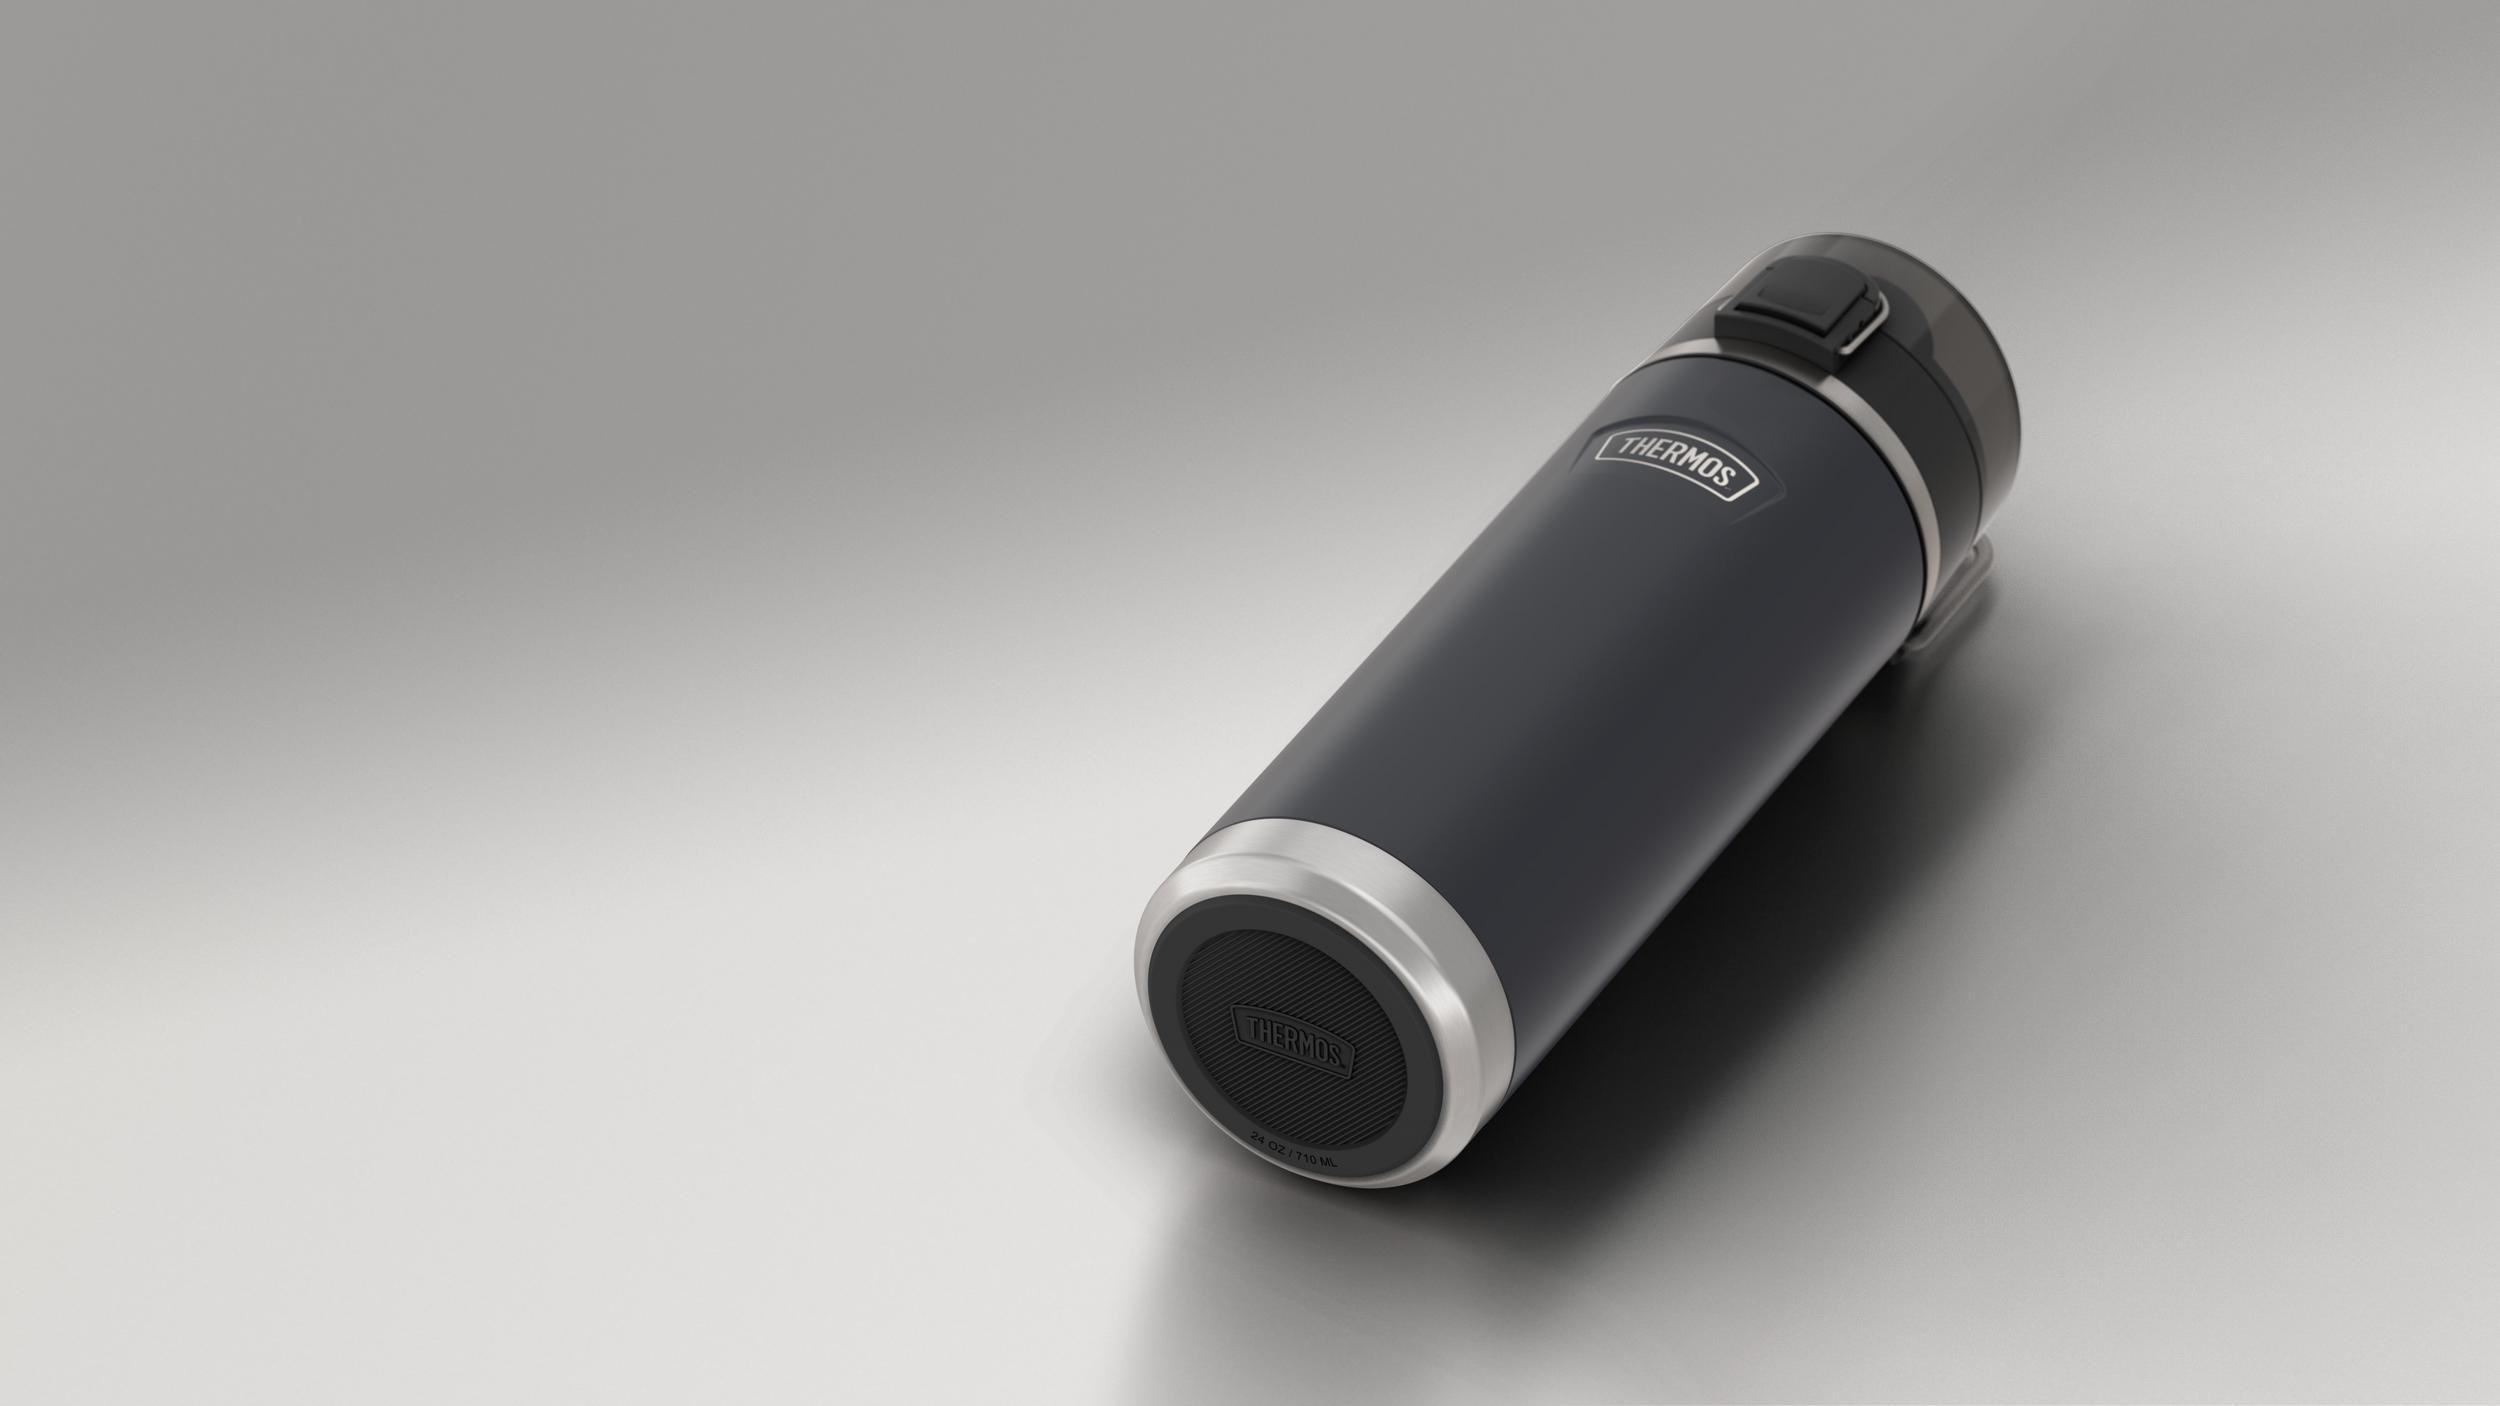 The Icon Bottle With Spout 710ml